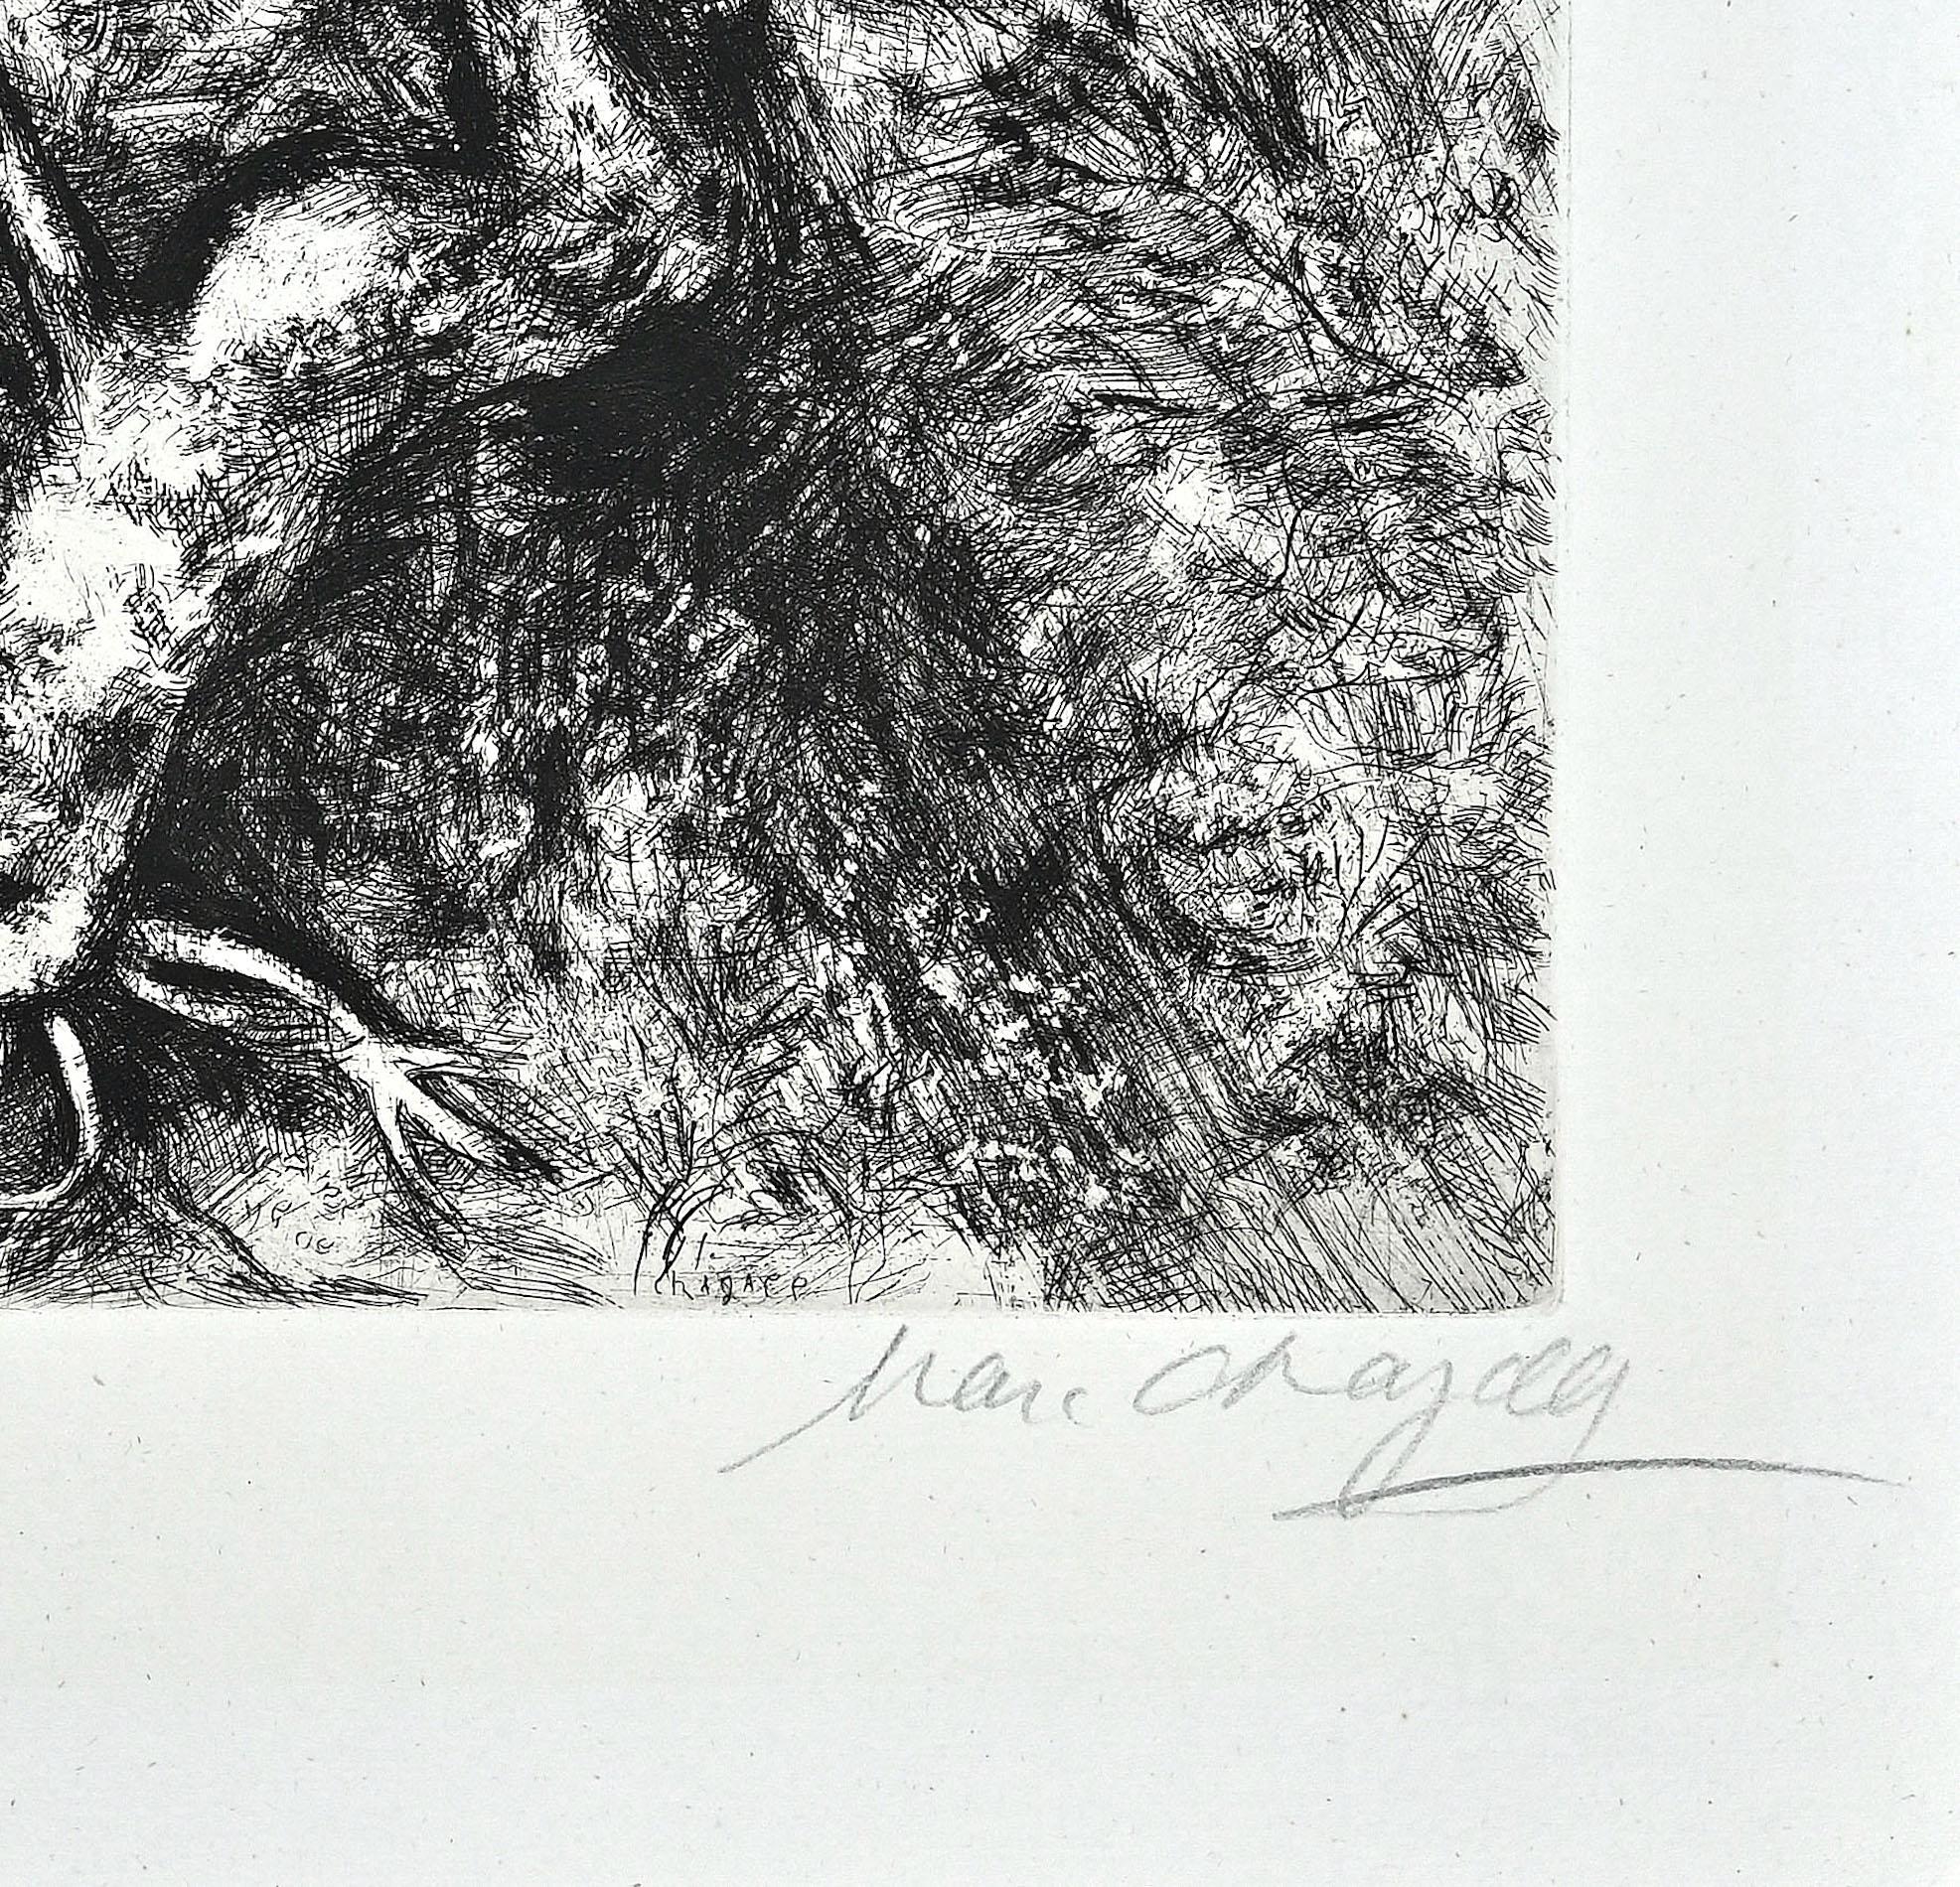 Le Cerf Malade -  Etching by Marc Chagall - 1952 1